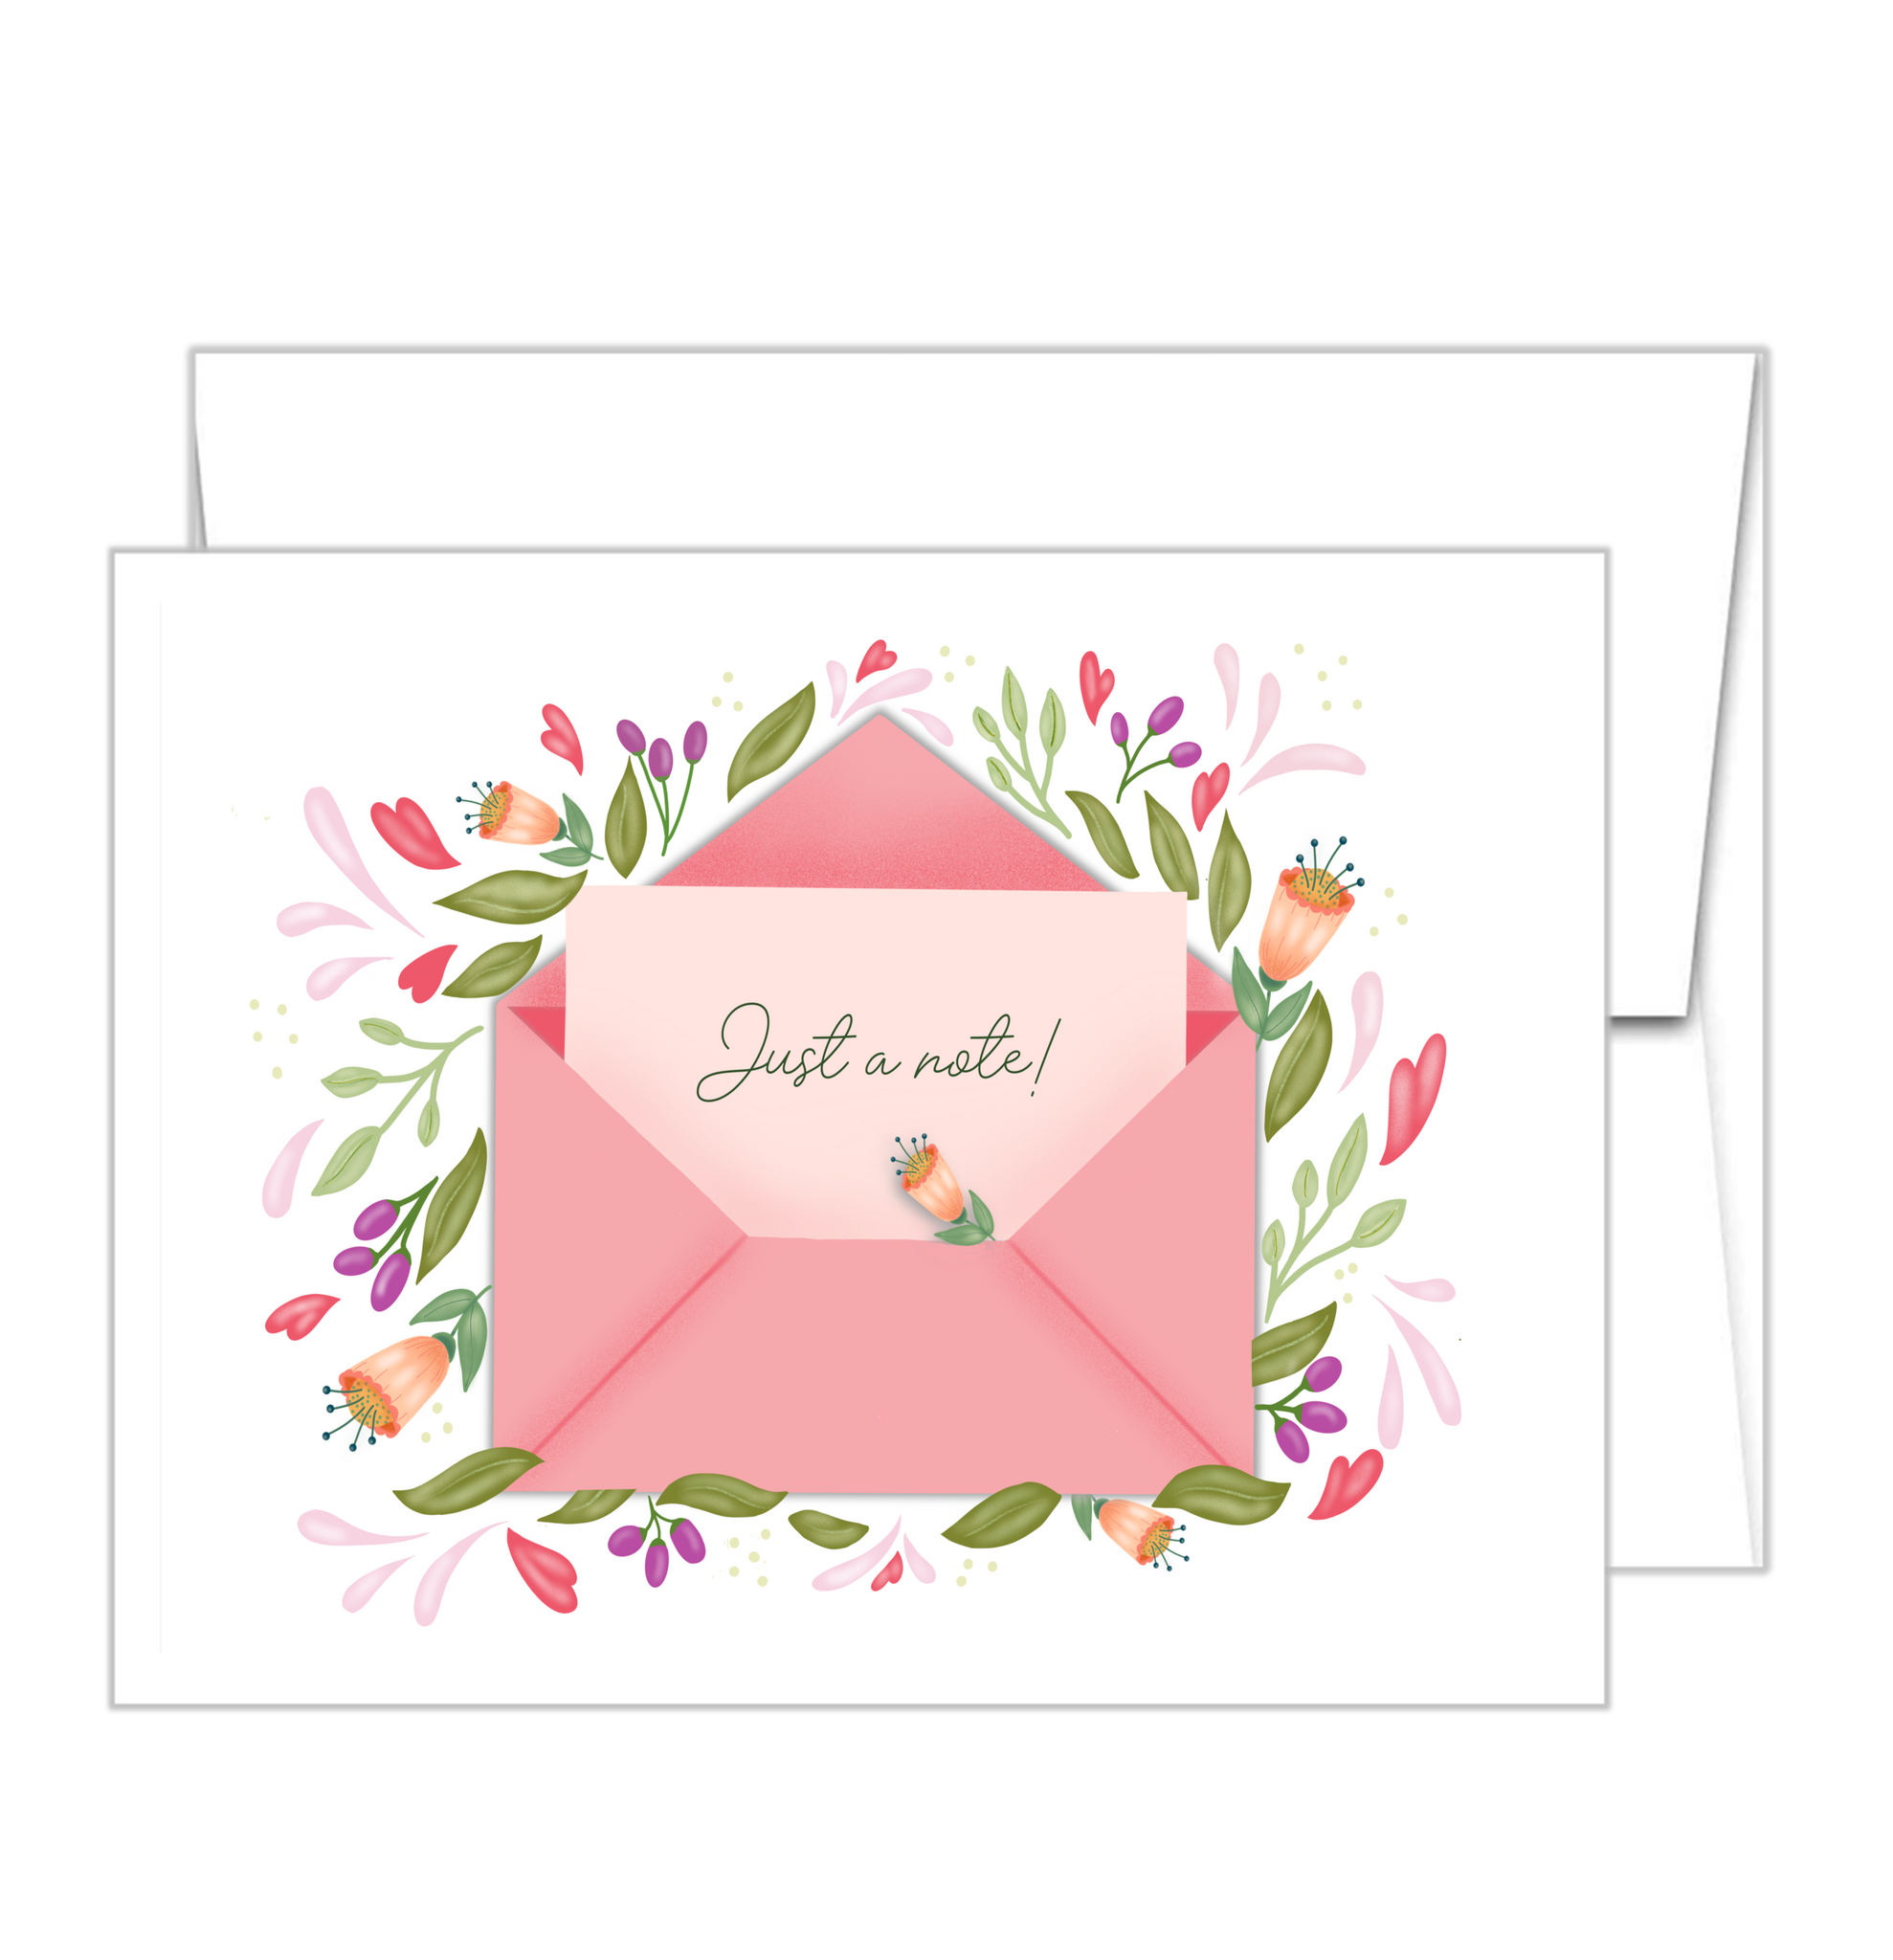 "Just A Note" -On Pink Envelope